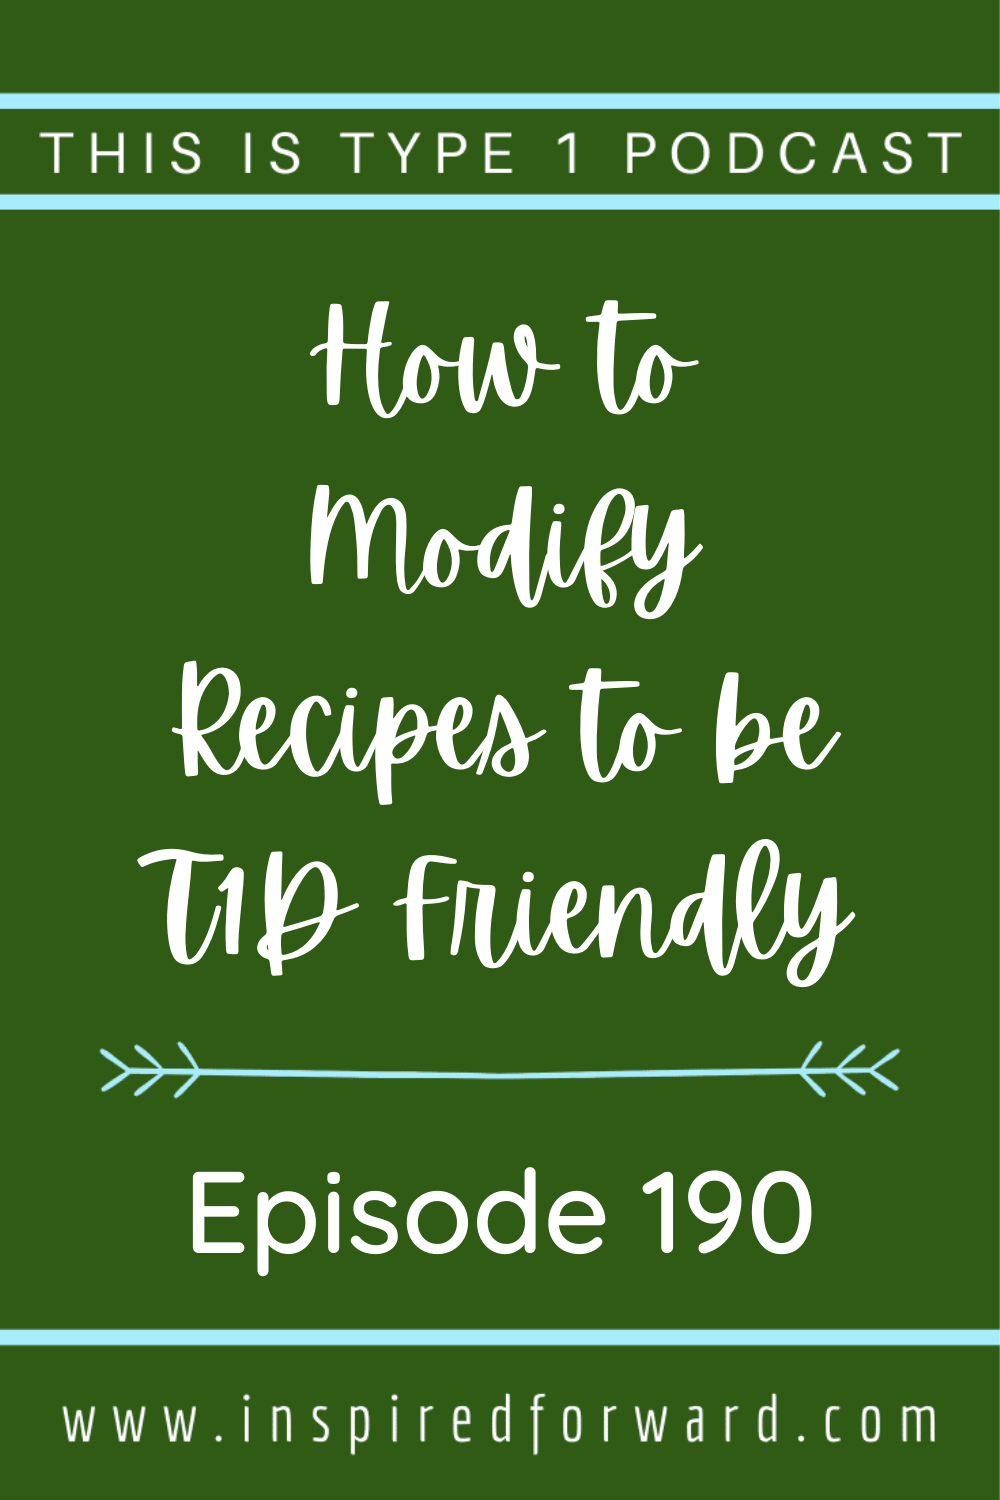 Learn how to modify recipes to make them more T1D friendly.